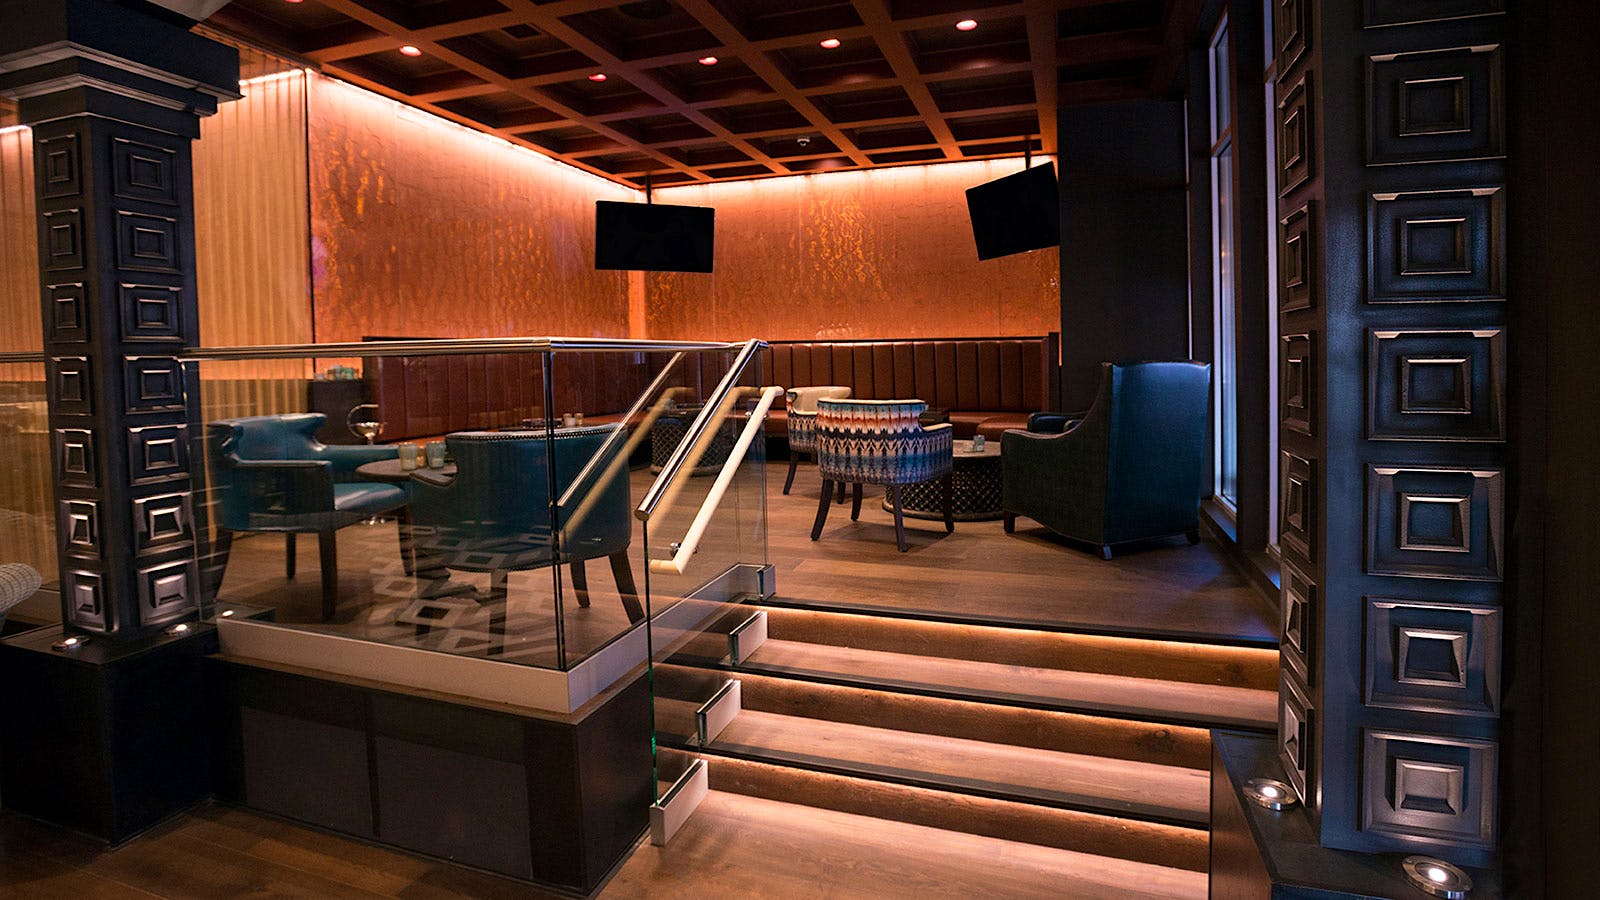 Patel’s new Pittsburgh venue can best be described as an upscale, cigar-friendly lounge with the feel of a nightclub.